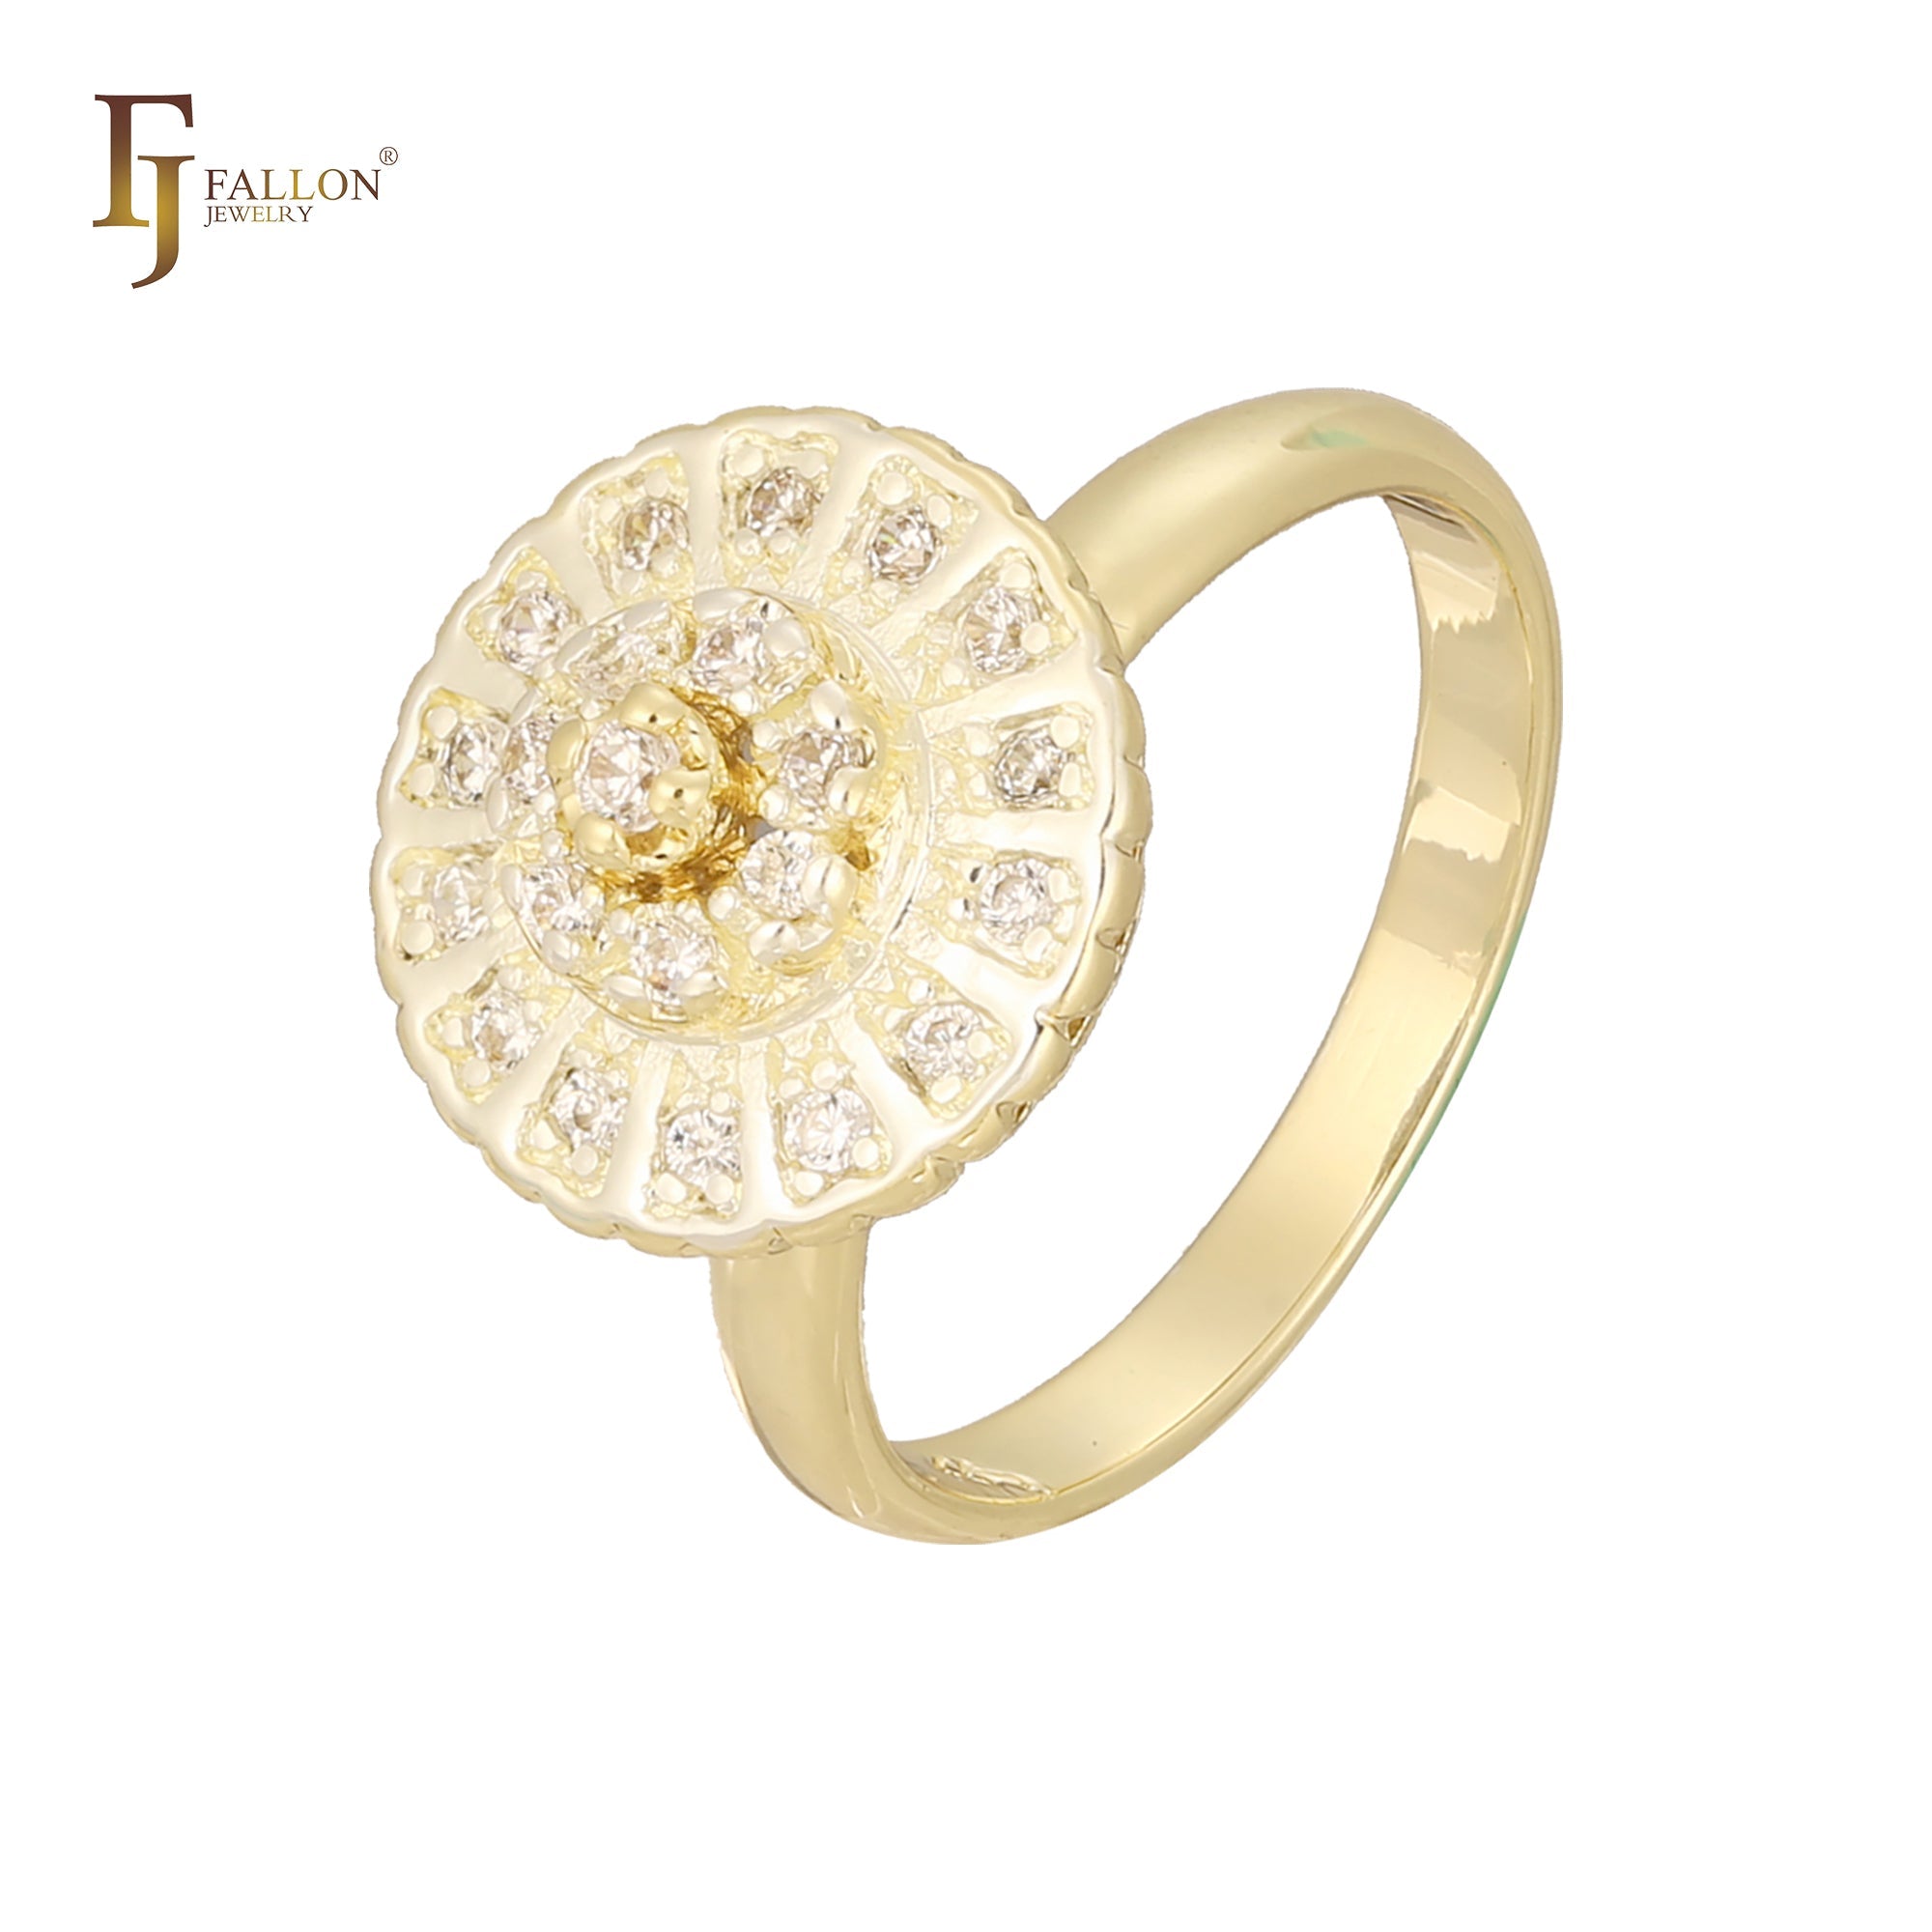 The grand flower cluster rings plated in 14K Gold, 18K Gold, two tone